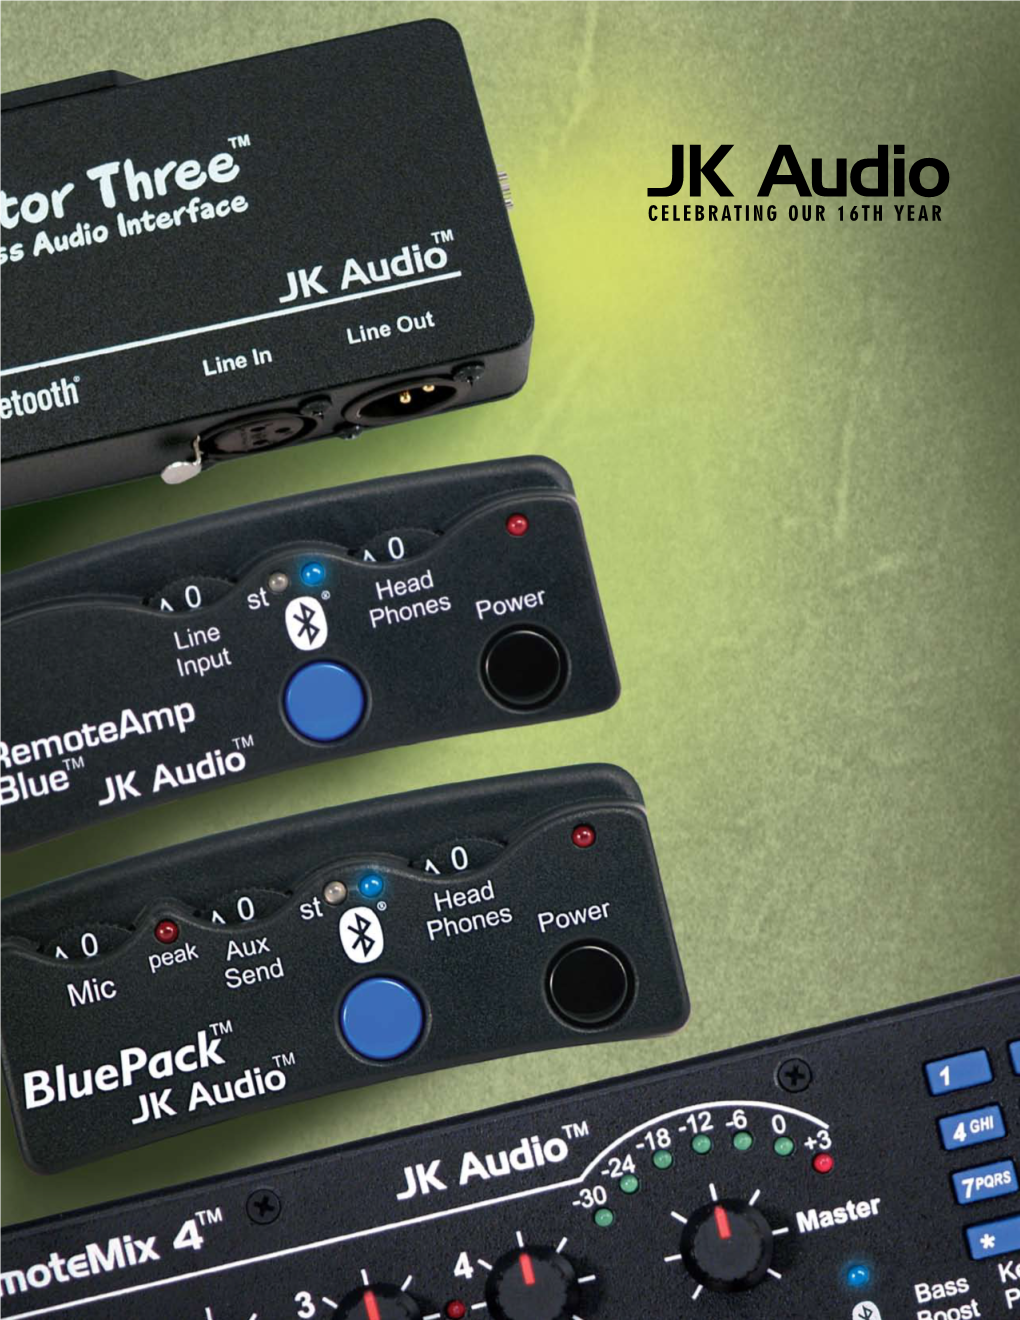 JK Audio CELEBRATING Our 16Th YEAR